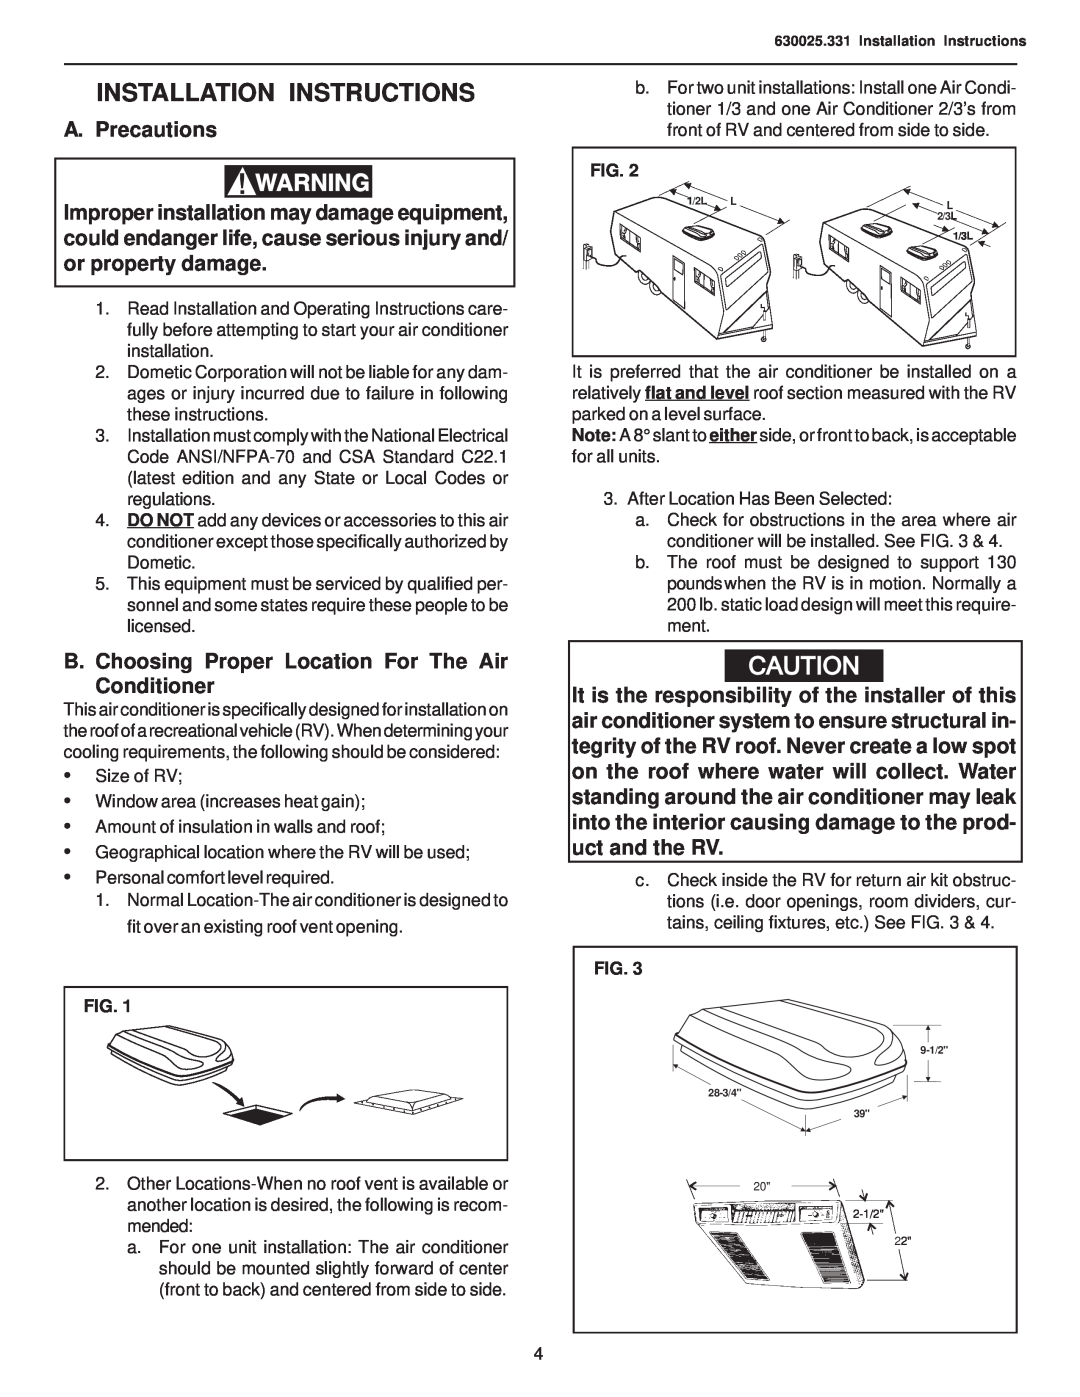 Dometic 630025.331 operating instructions Installation Instructions, A. Precautions 